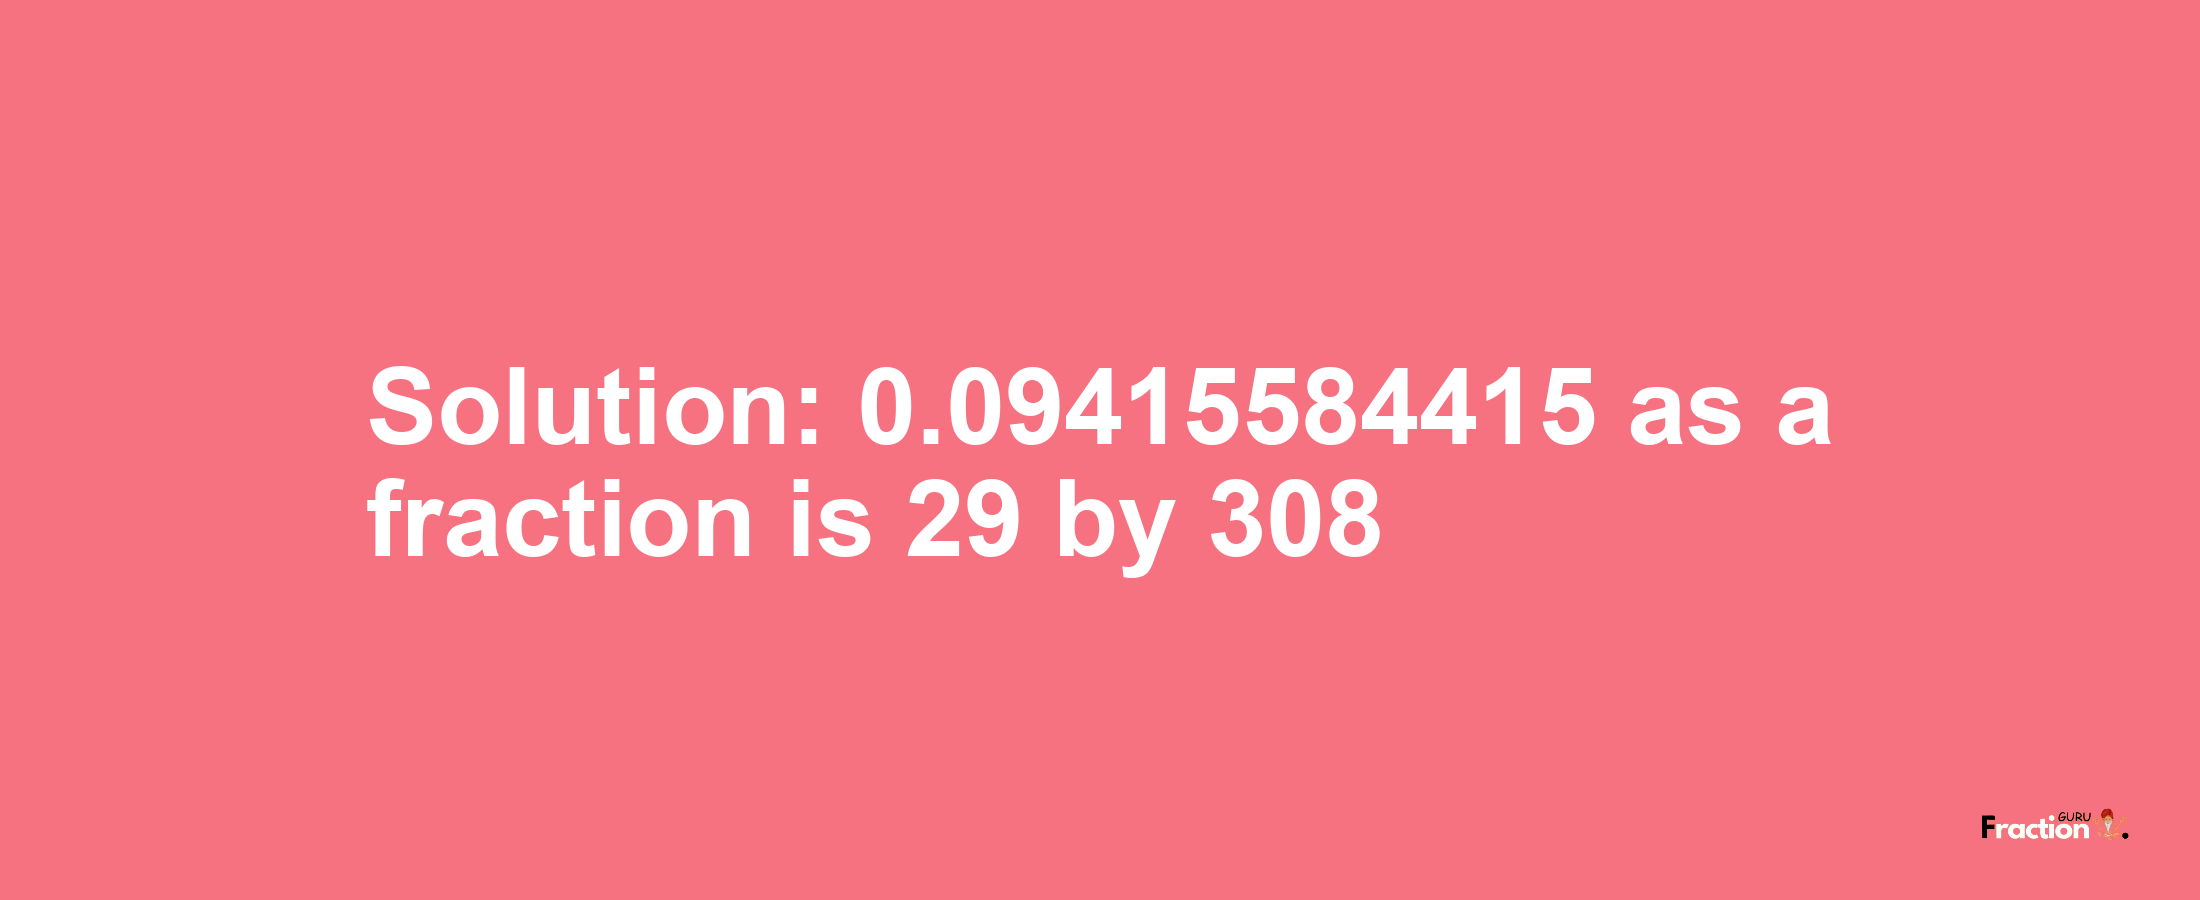 Solution:0.09415584415 as a fraction is 29/308